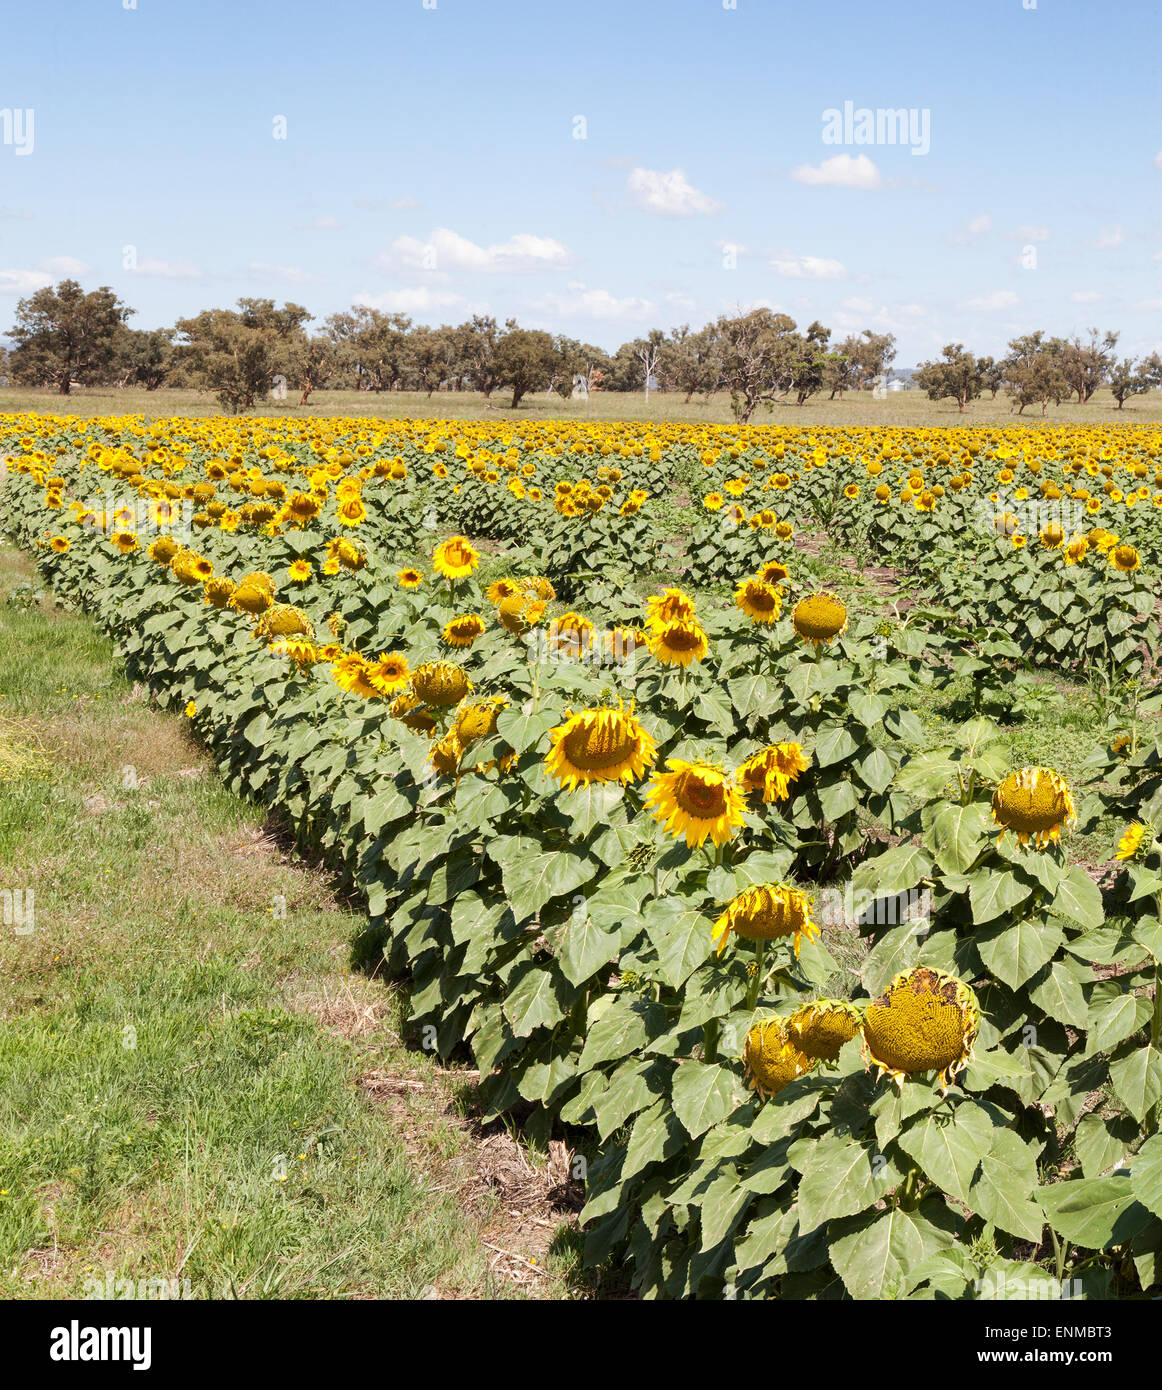 Sunflowers in NSW Australia in region of Quirindi at the height of summer Stock Photo